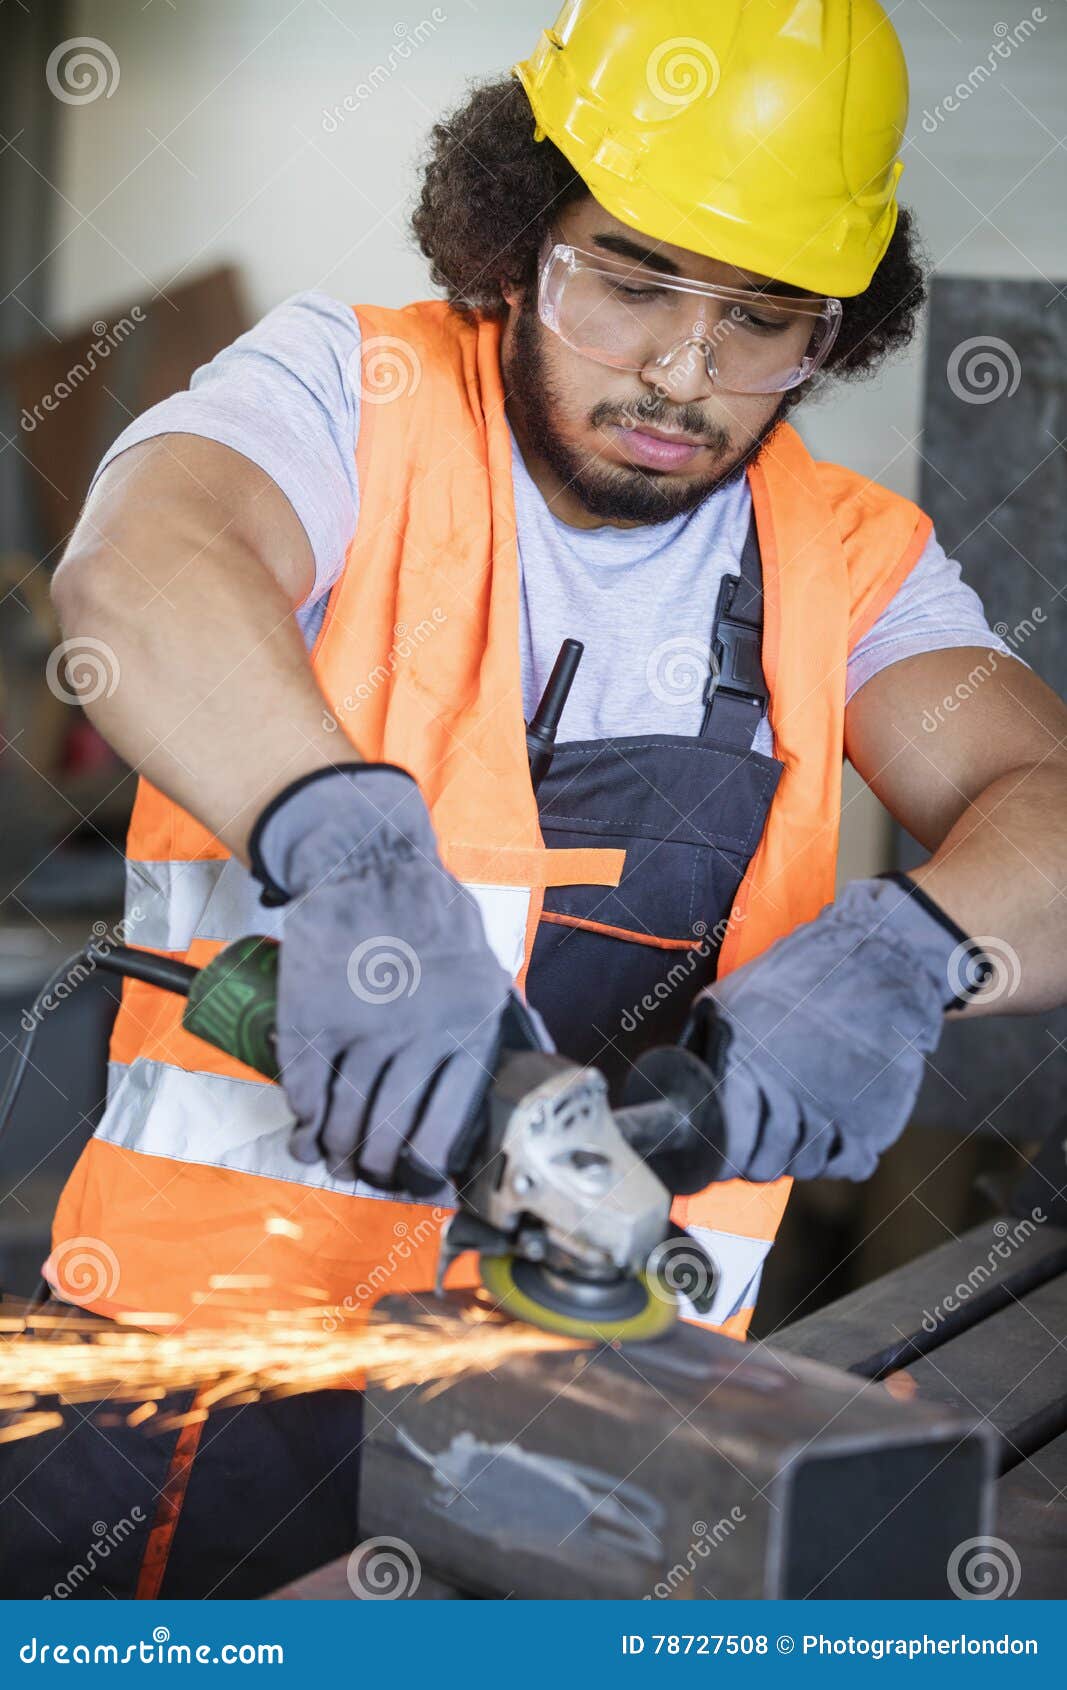 young manual worker grinding metal in industry